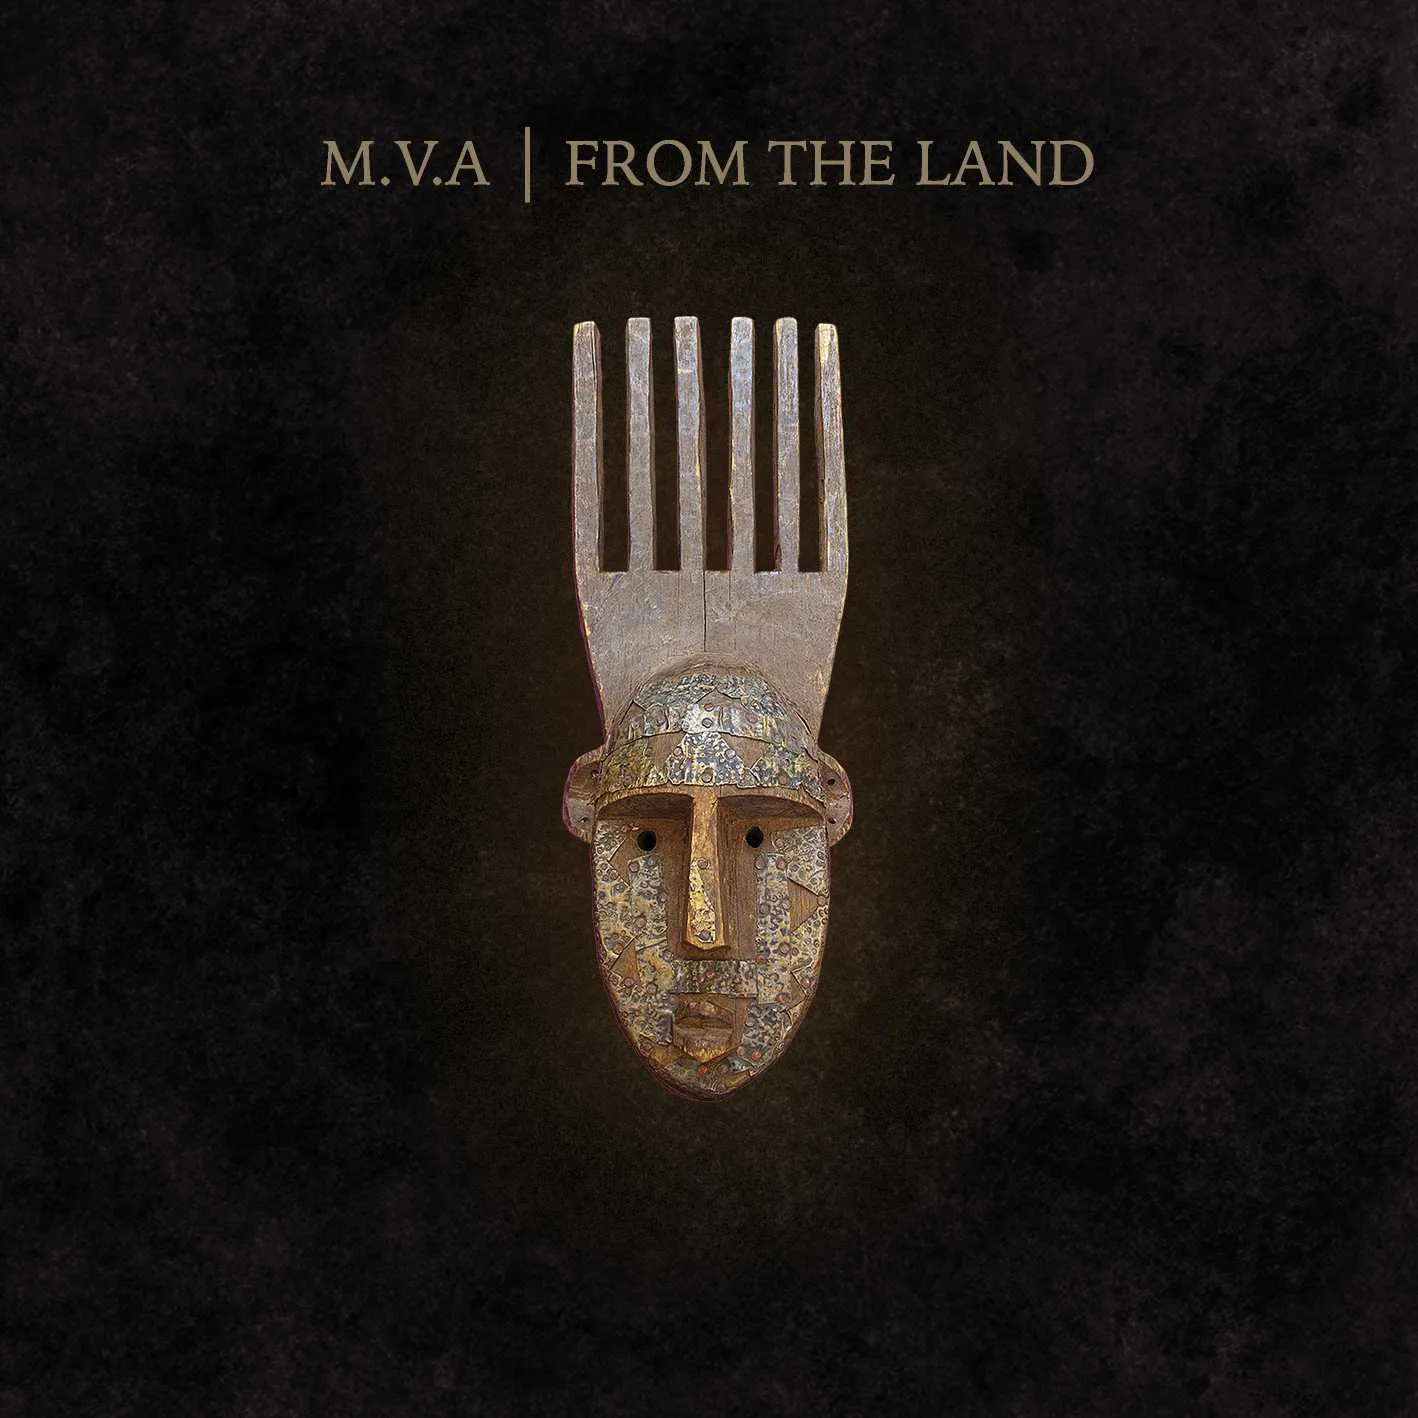 Album cover for “From The Land” by M.V.A